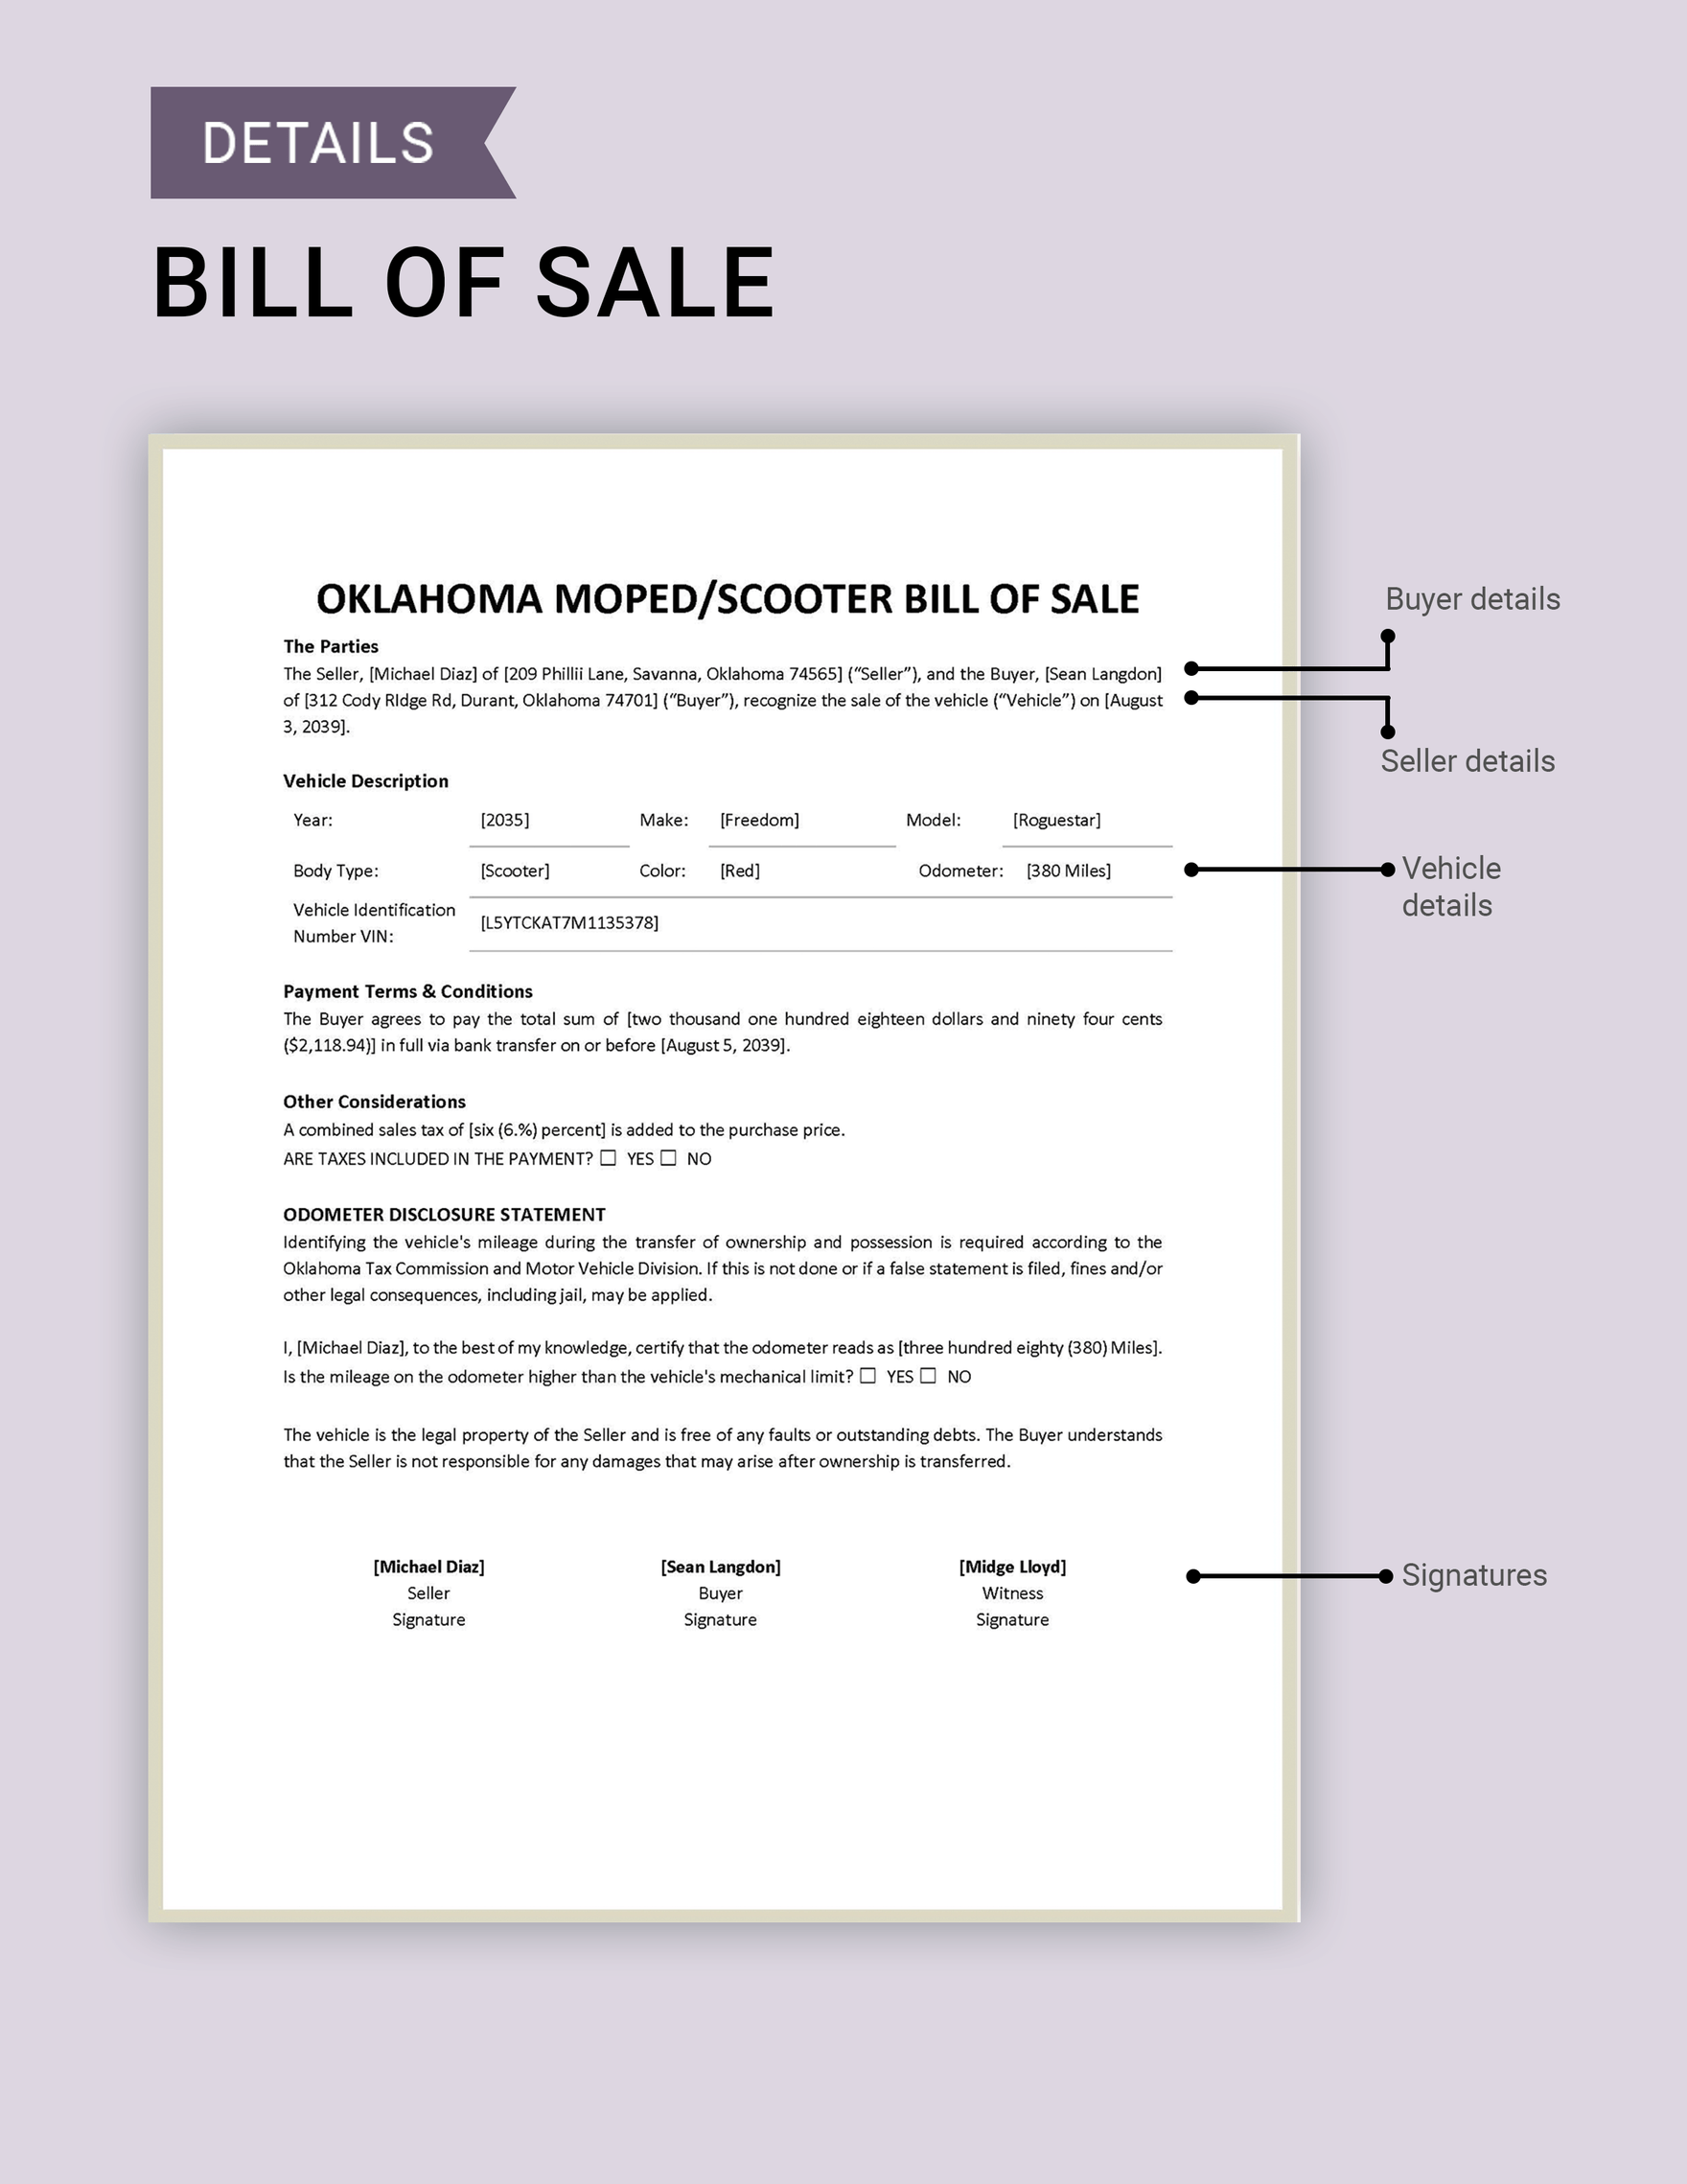 Oklahoma Moped / Scooter Bill of Sale Template